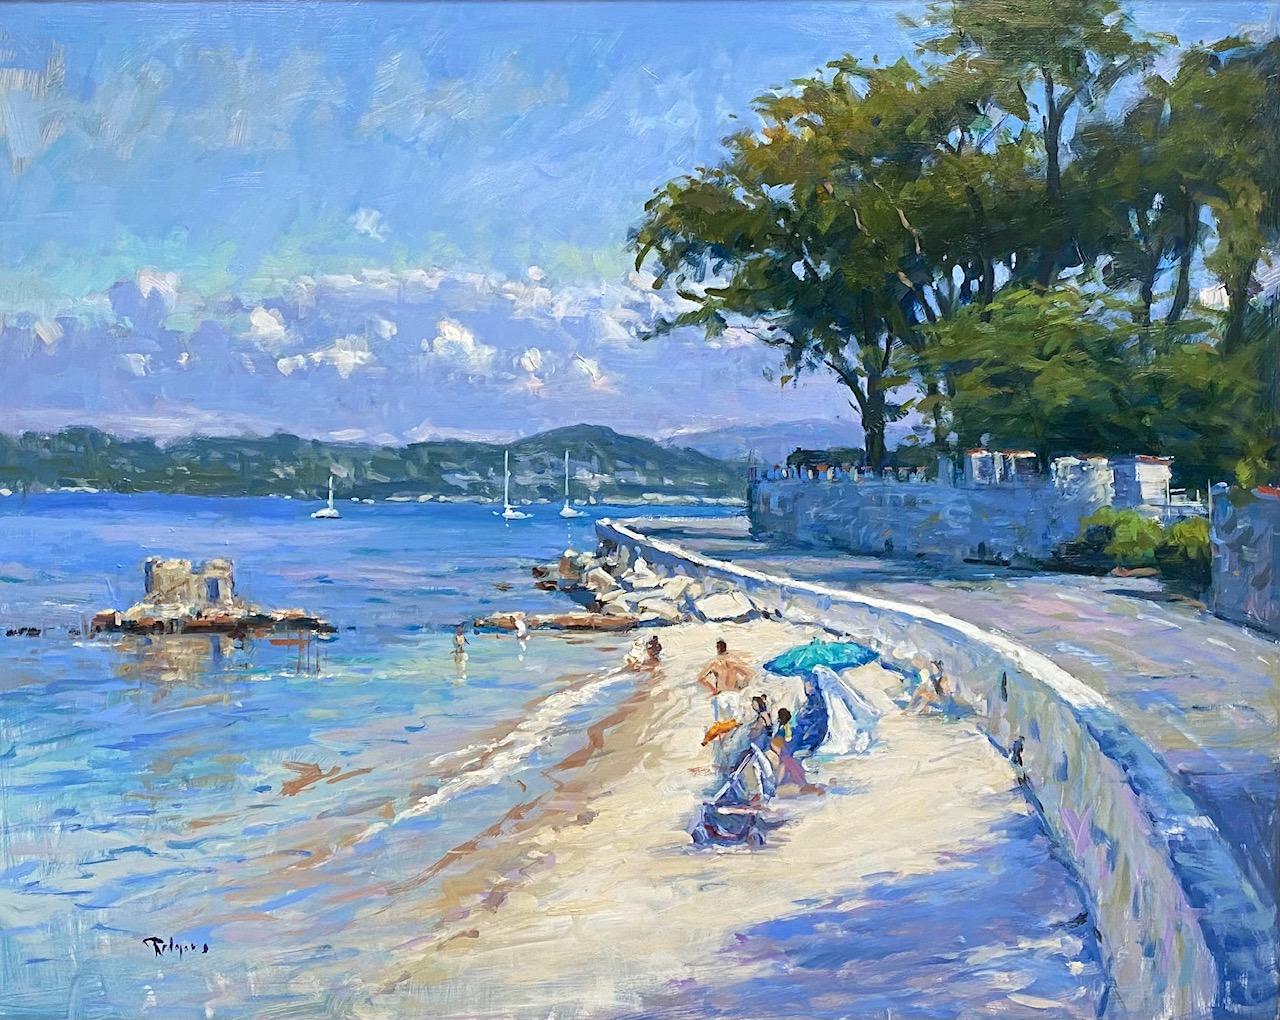 Cap d'Antibes Cove, 24x30 original French impressionist marine landscape - Painting by Jim Rodgers